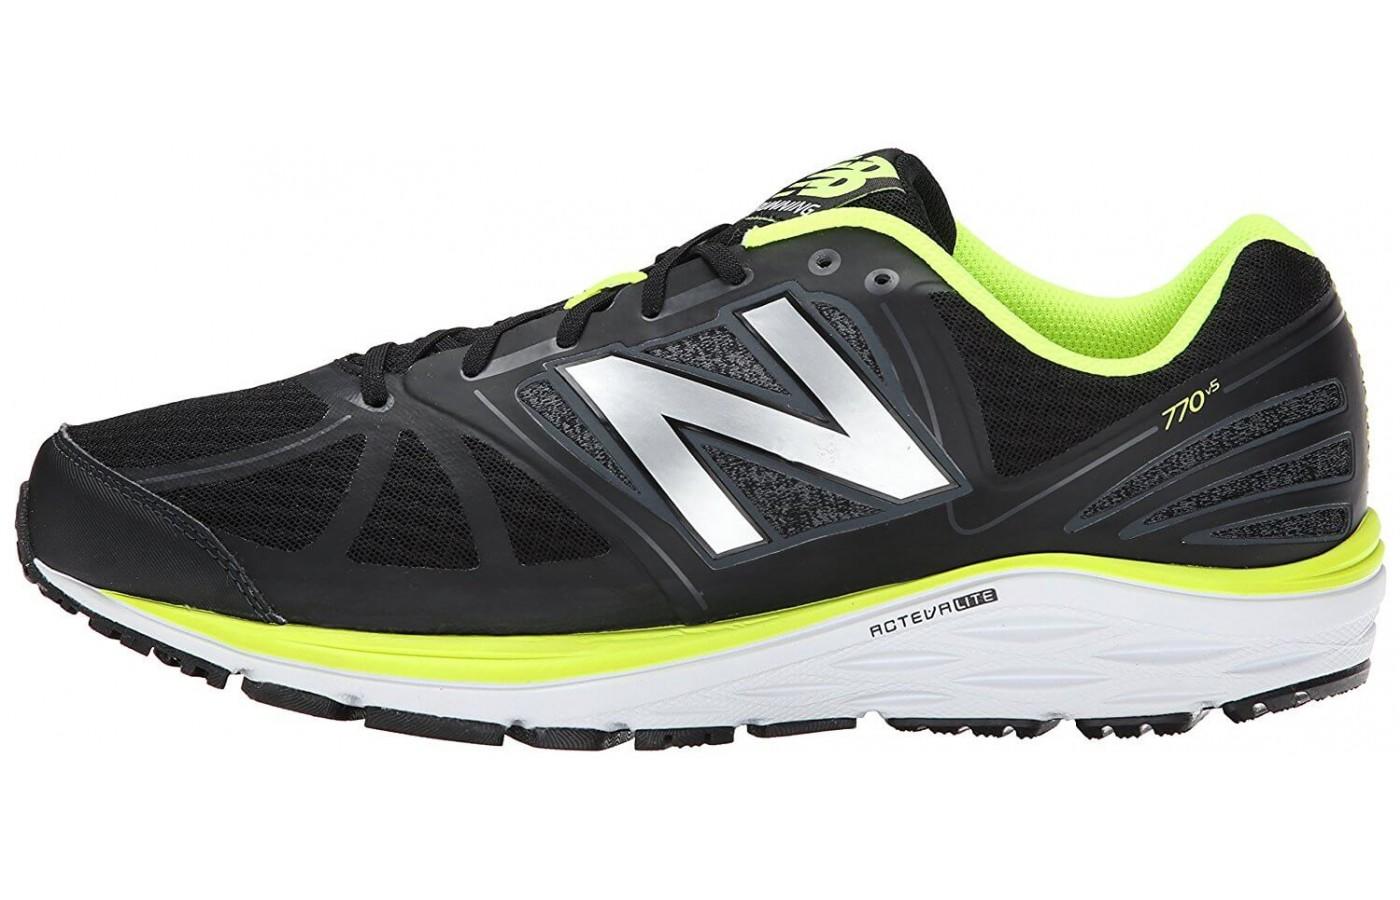 The New Balance 770 v5 features ACTEVA Lite and REVlite foam throughout the midsole.